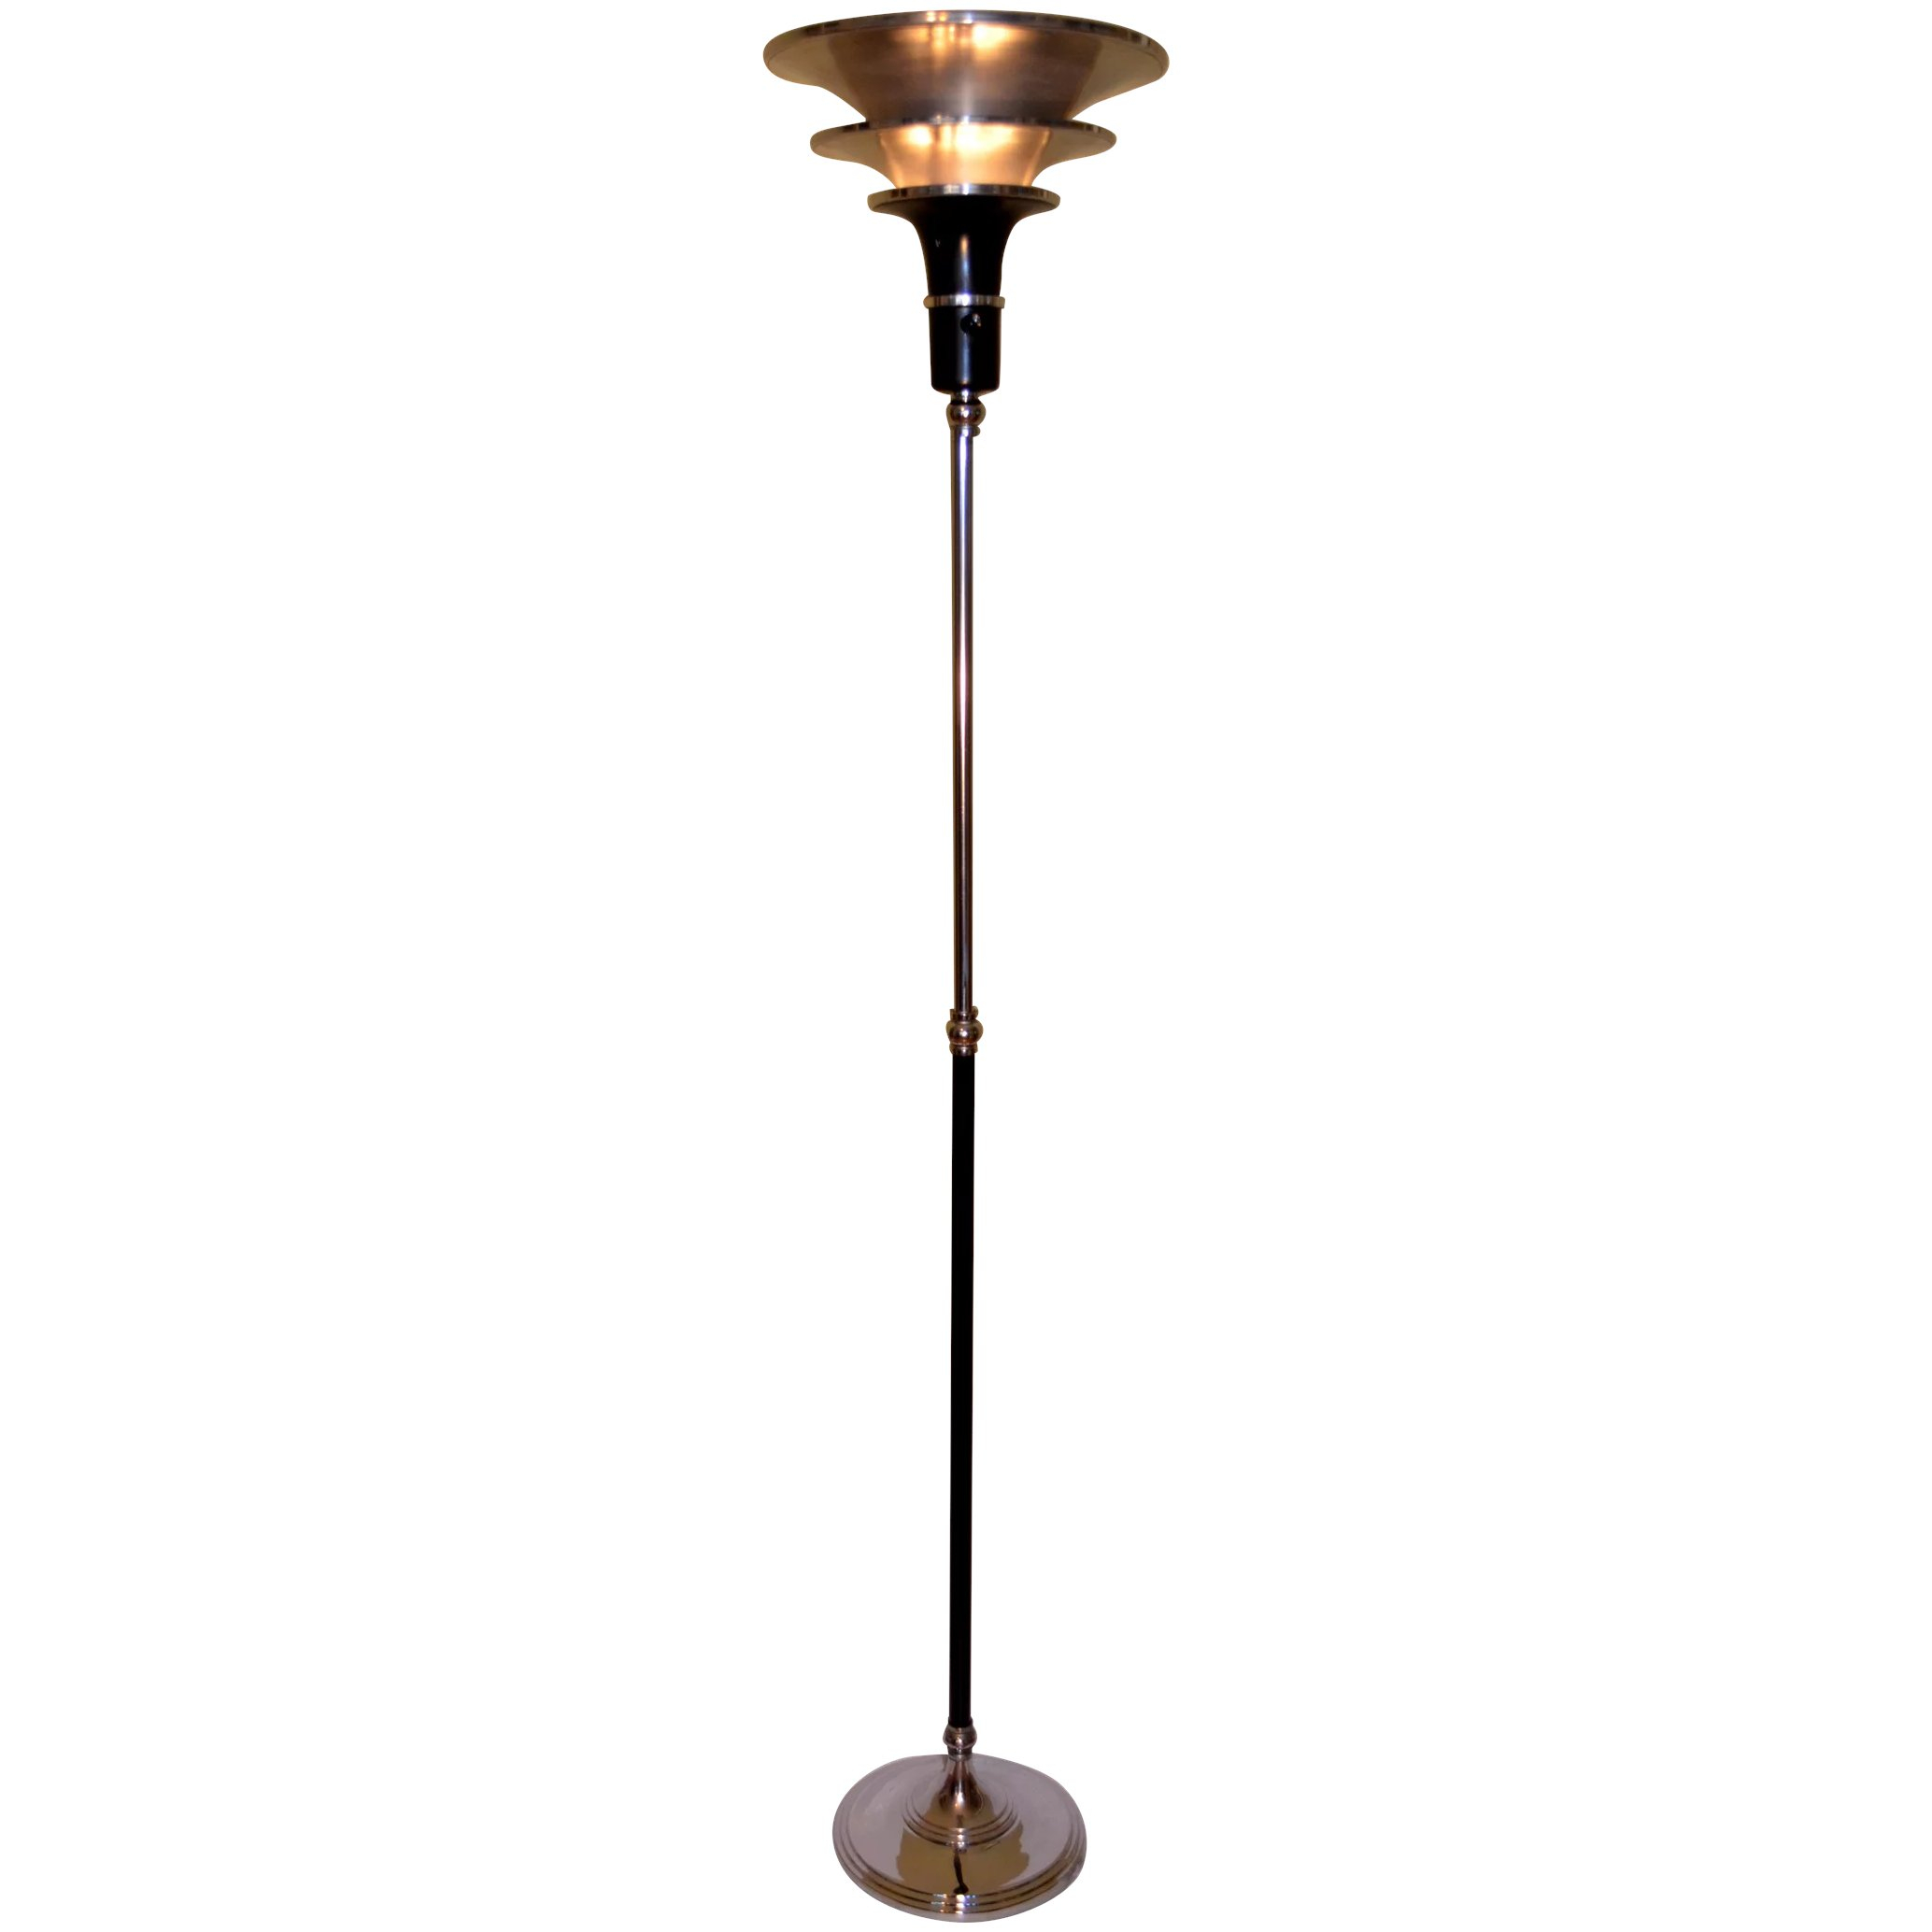 Art Deco Machine Age Torchiere Floor Lamp intended for proportions 2068 X 2068